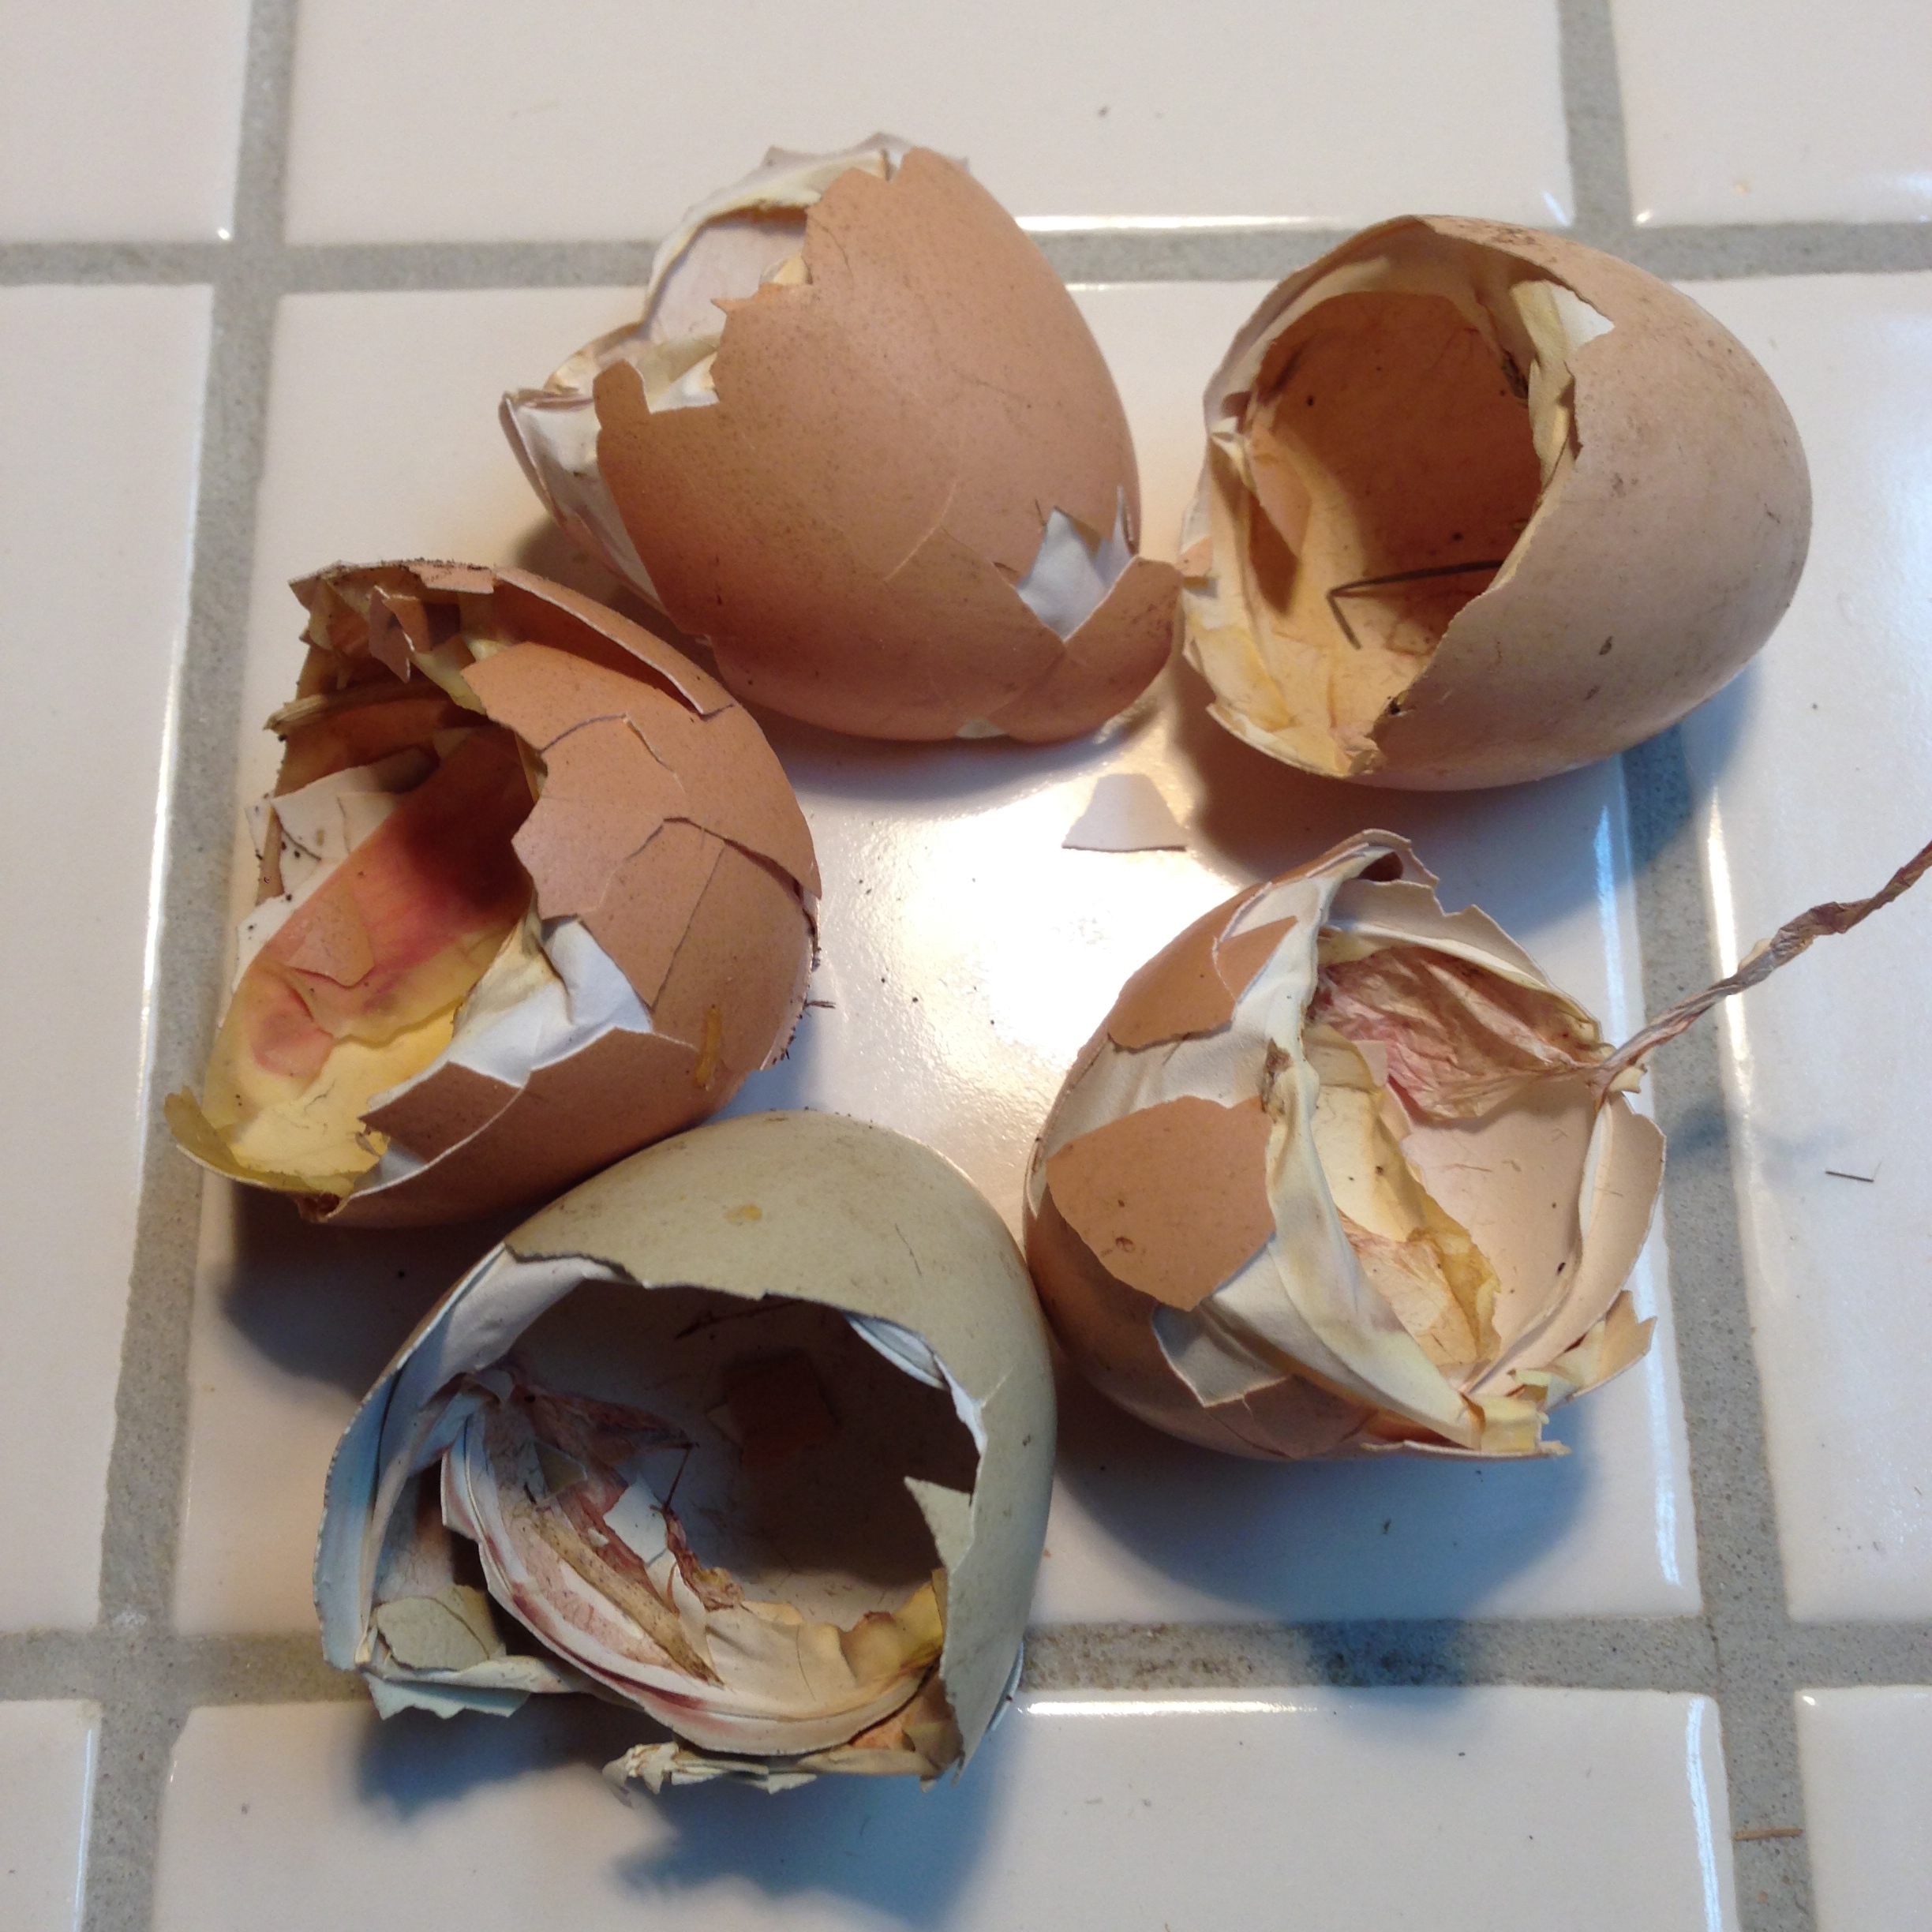 Eggs after they have hatched